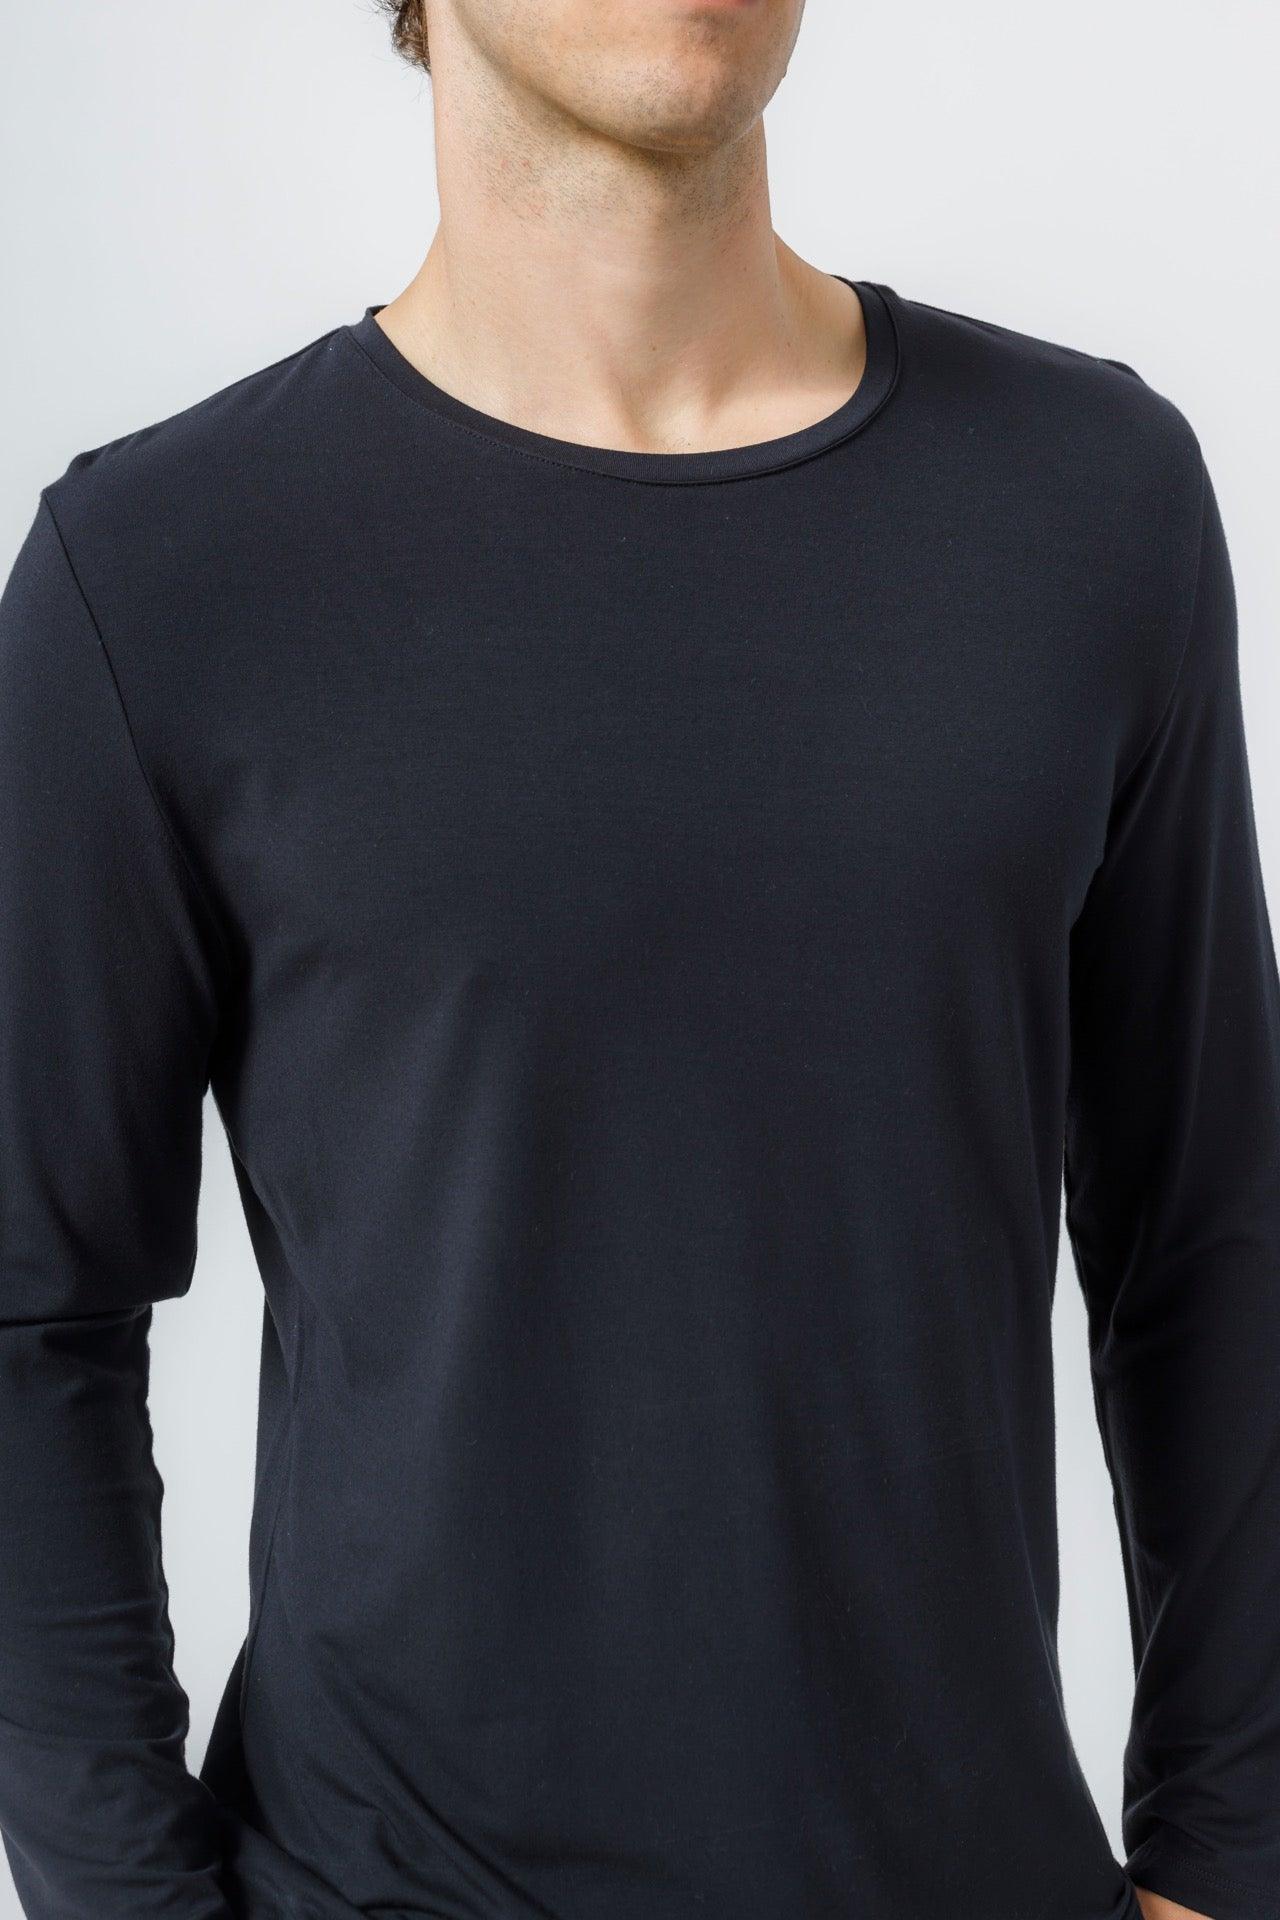 Men's Crew Neck Long Sleeve Bamboo Tee - NOT LABELED